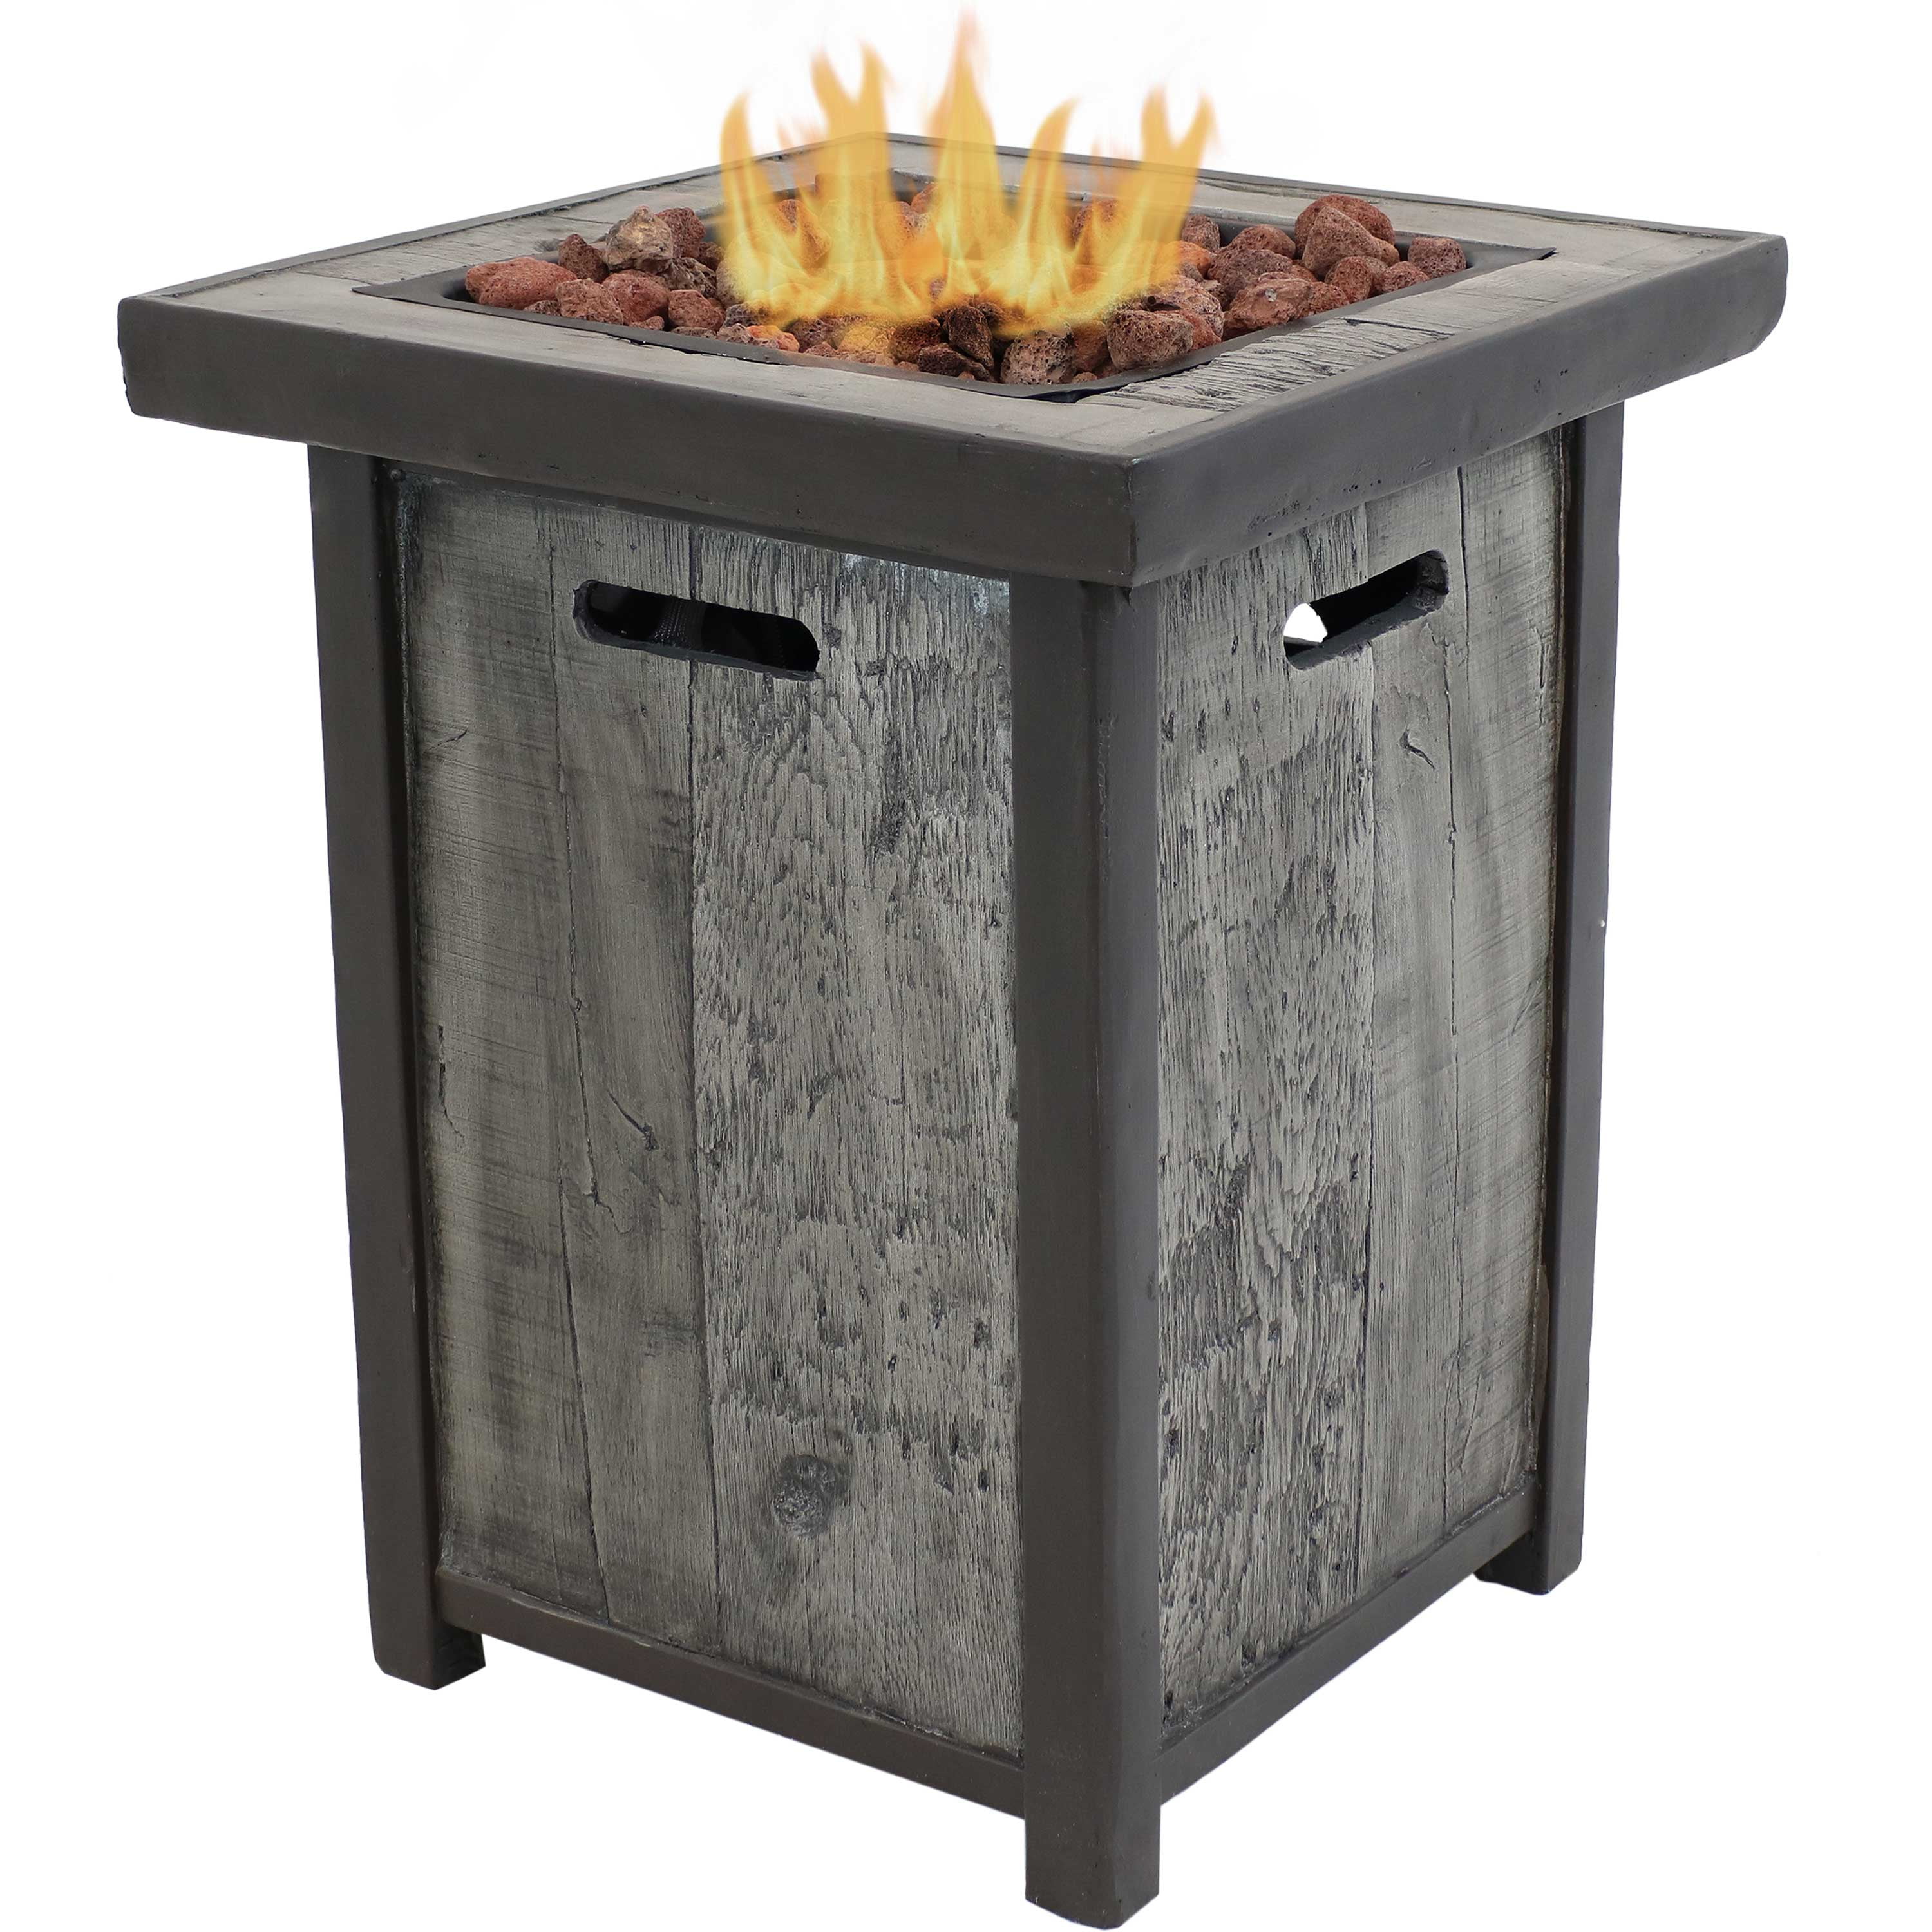 Sunnydaze Square Outdoor Propane Gas, Are Gas Fire Pits Better Than Wood